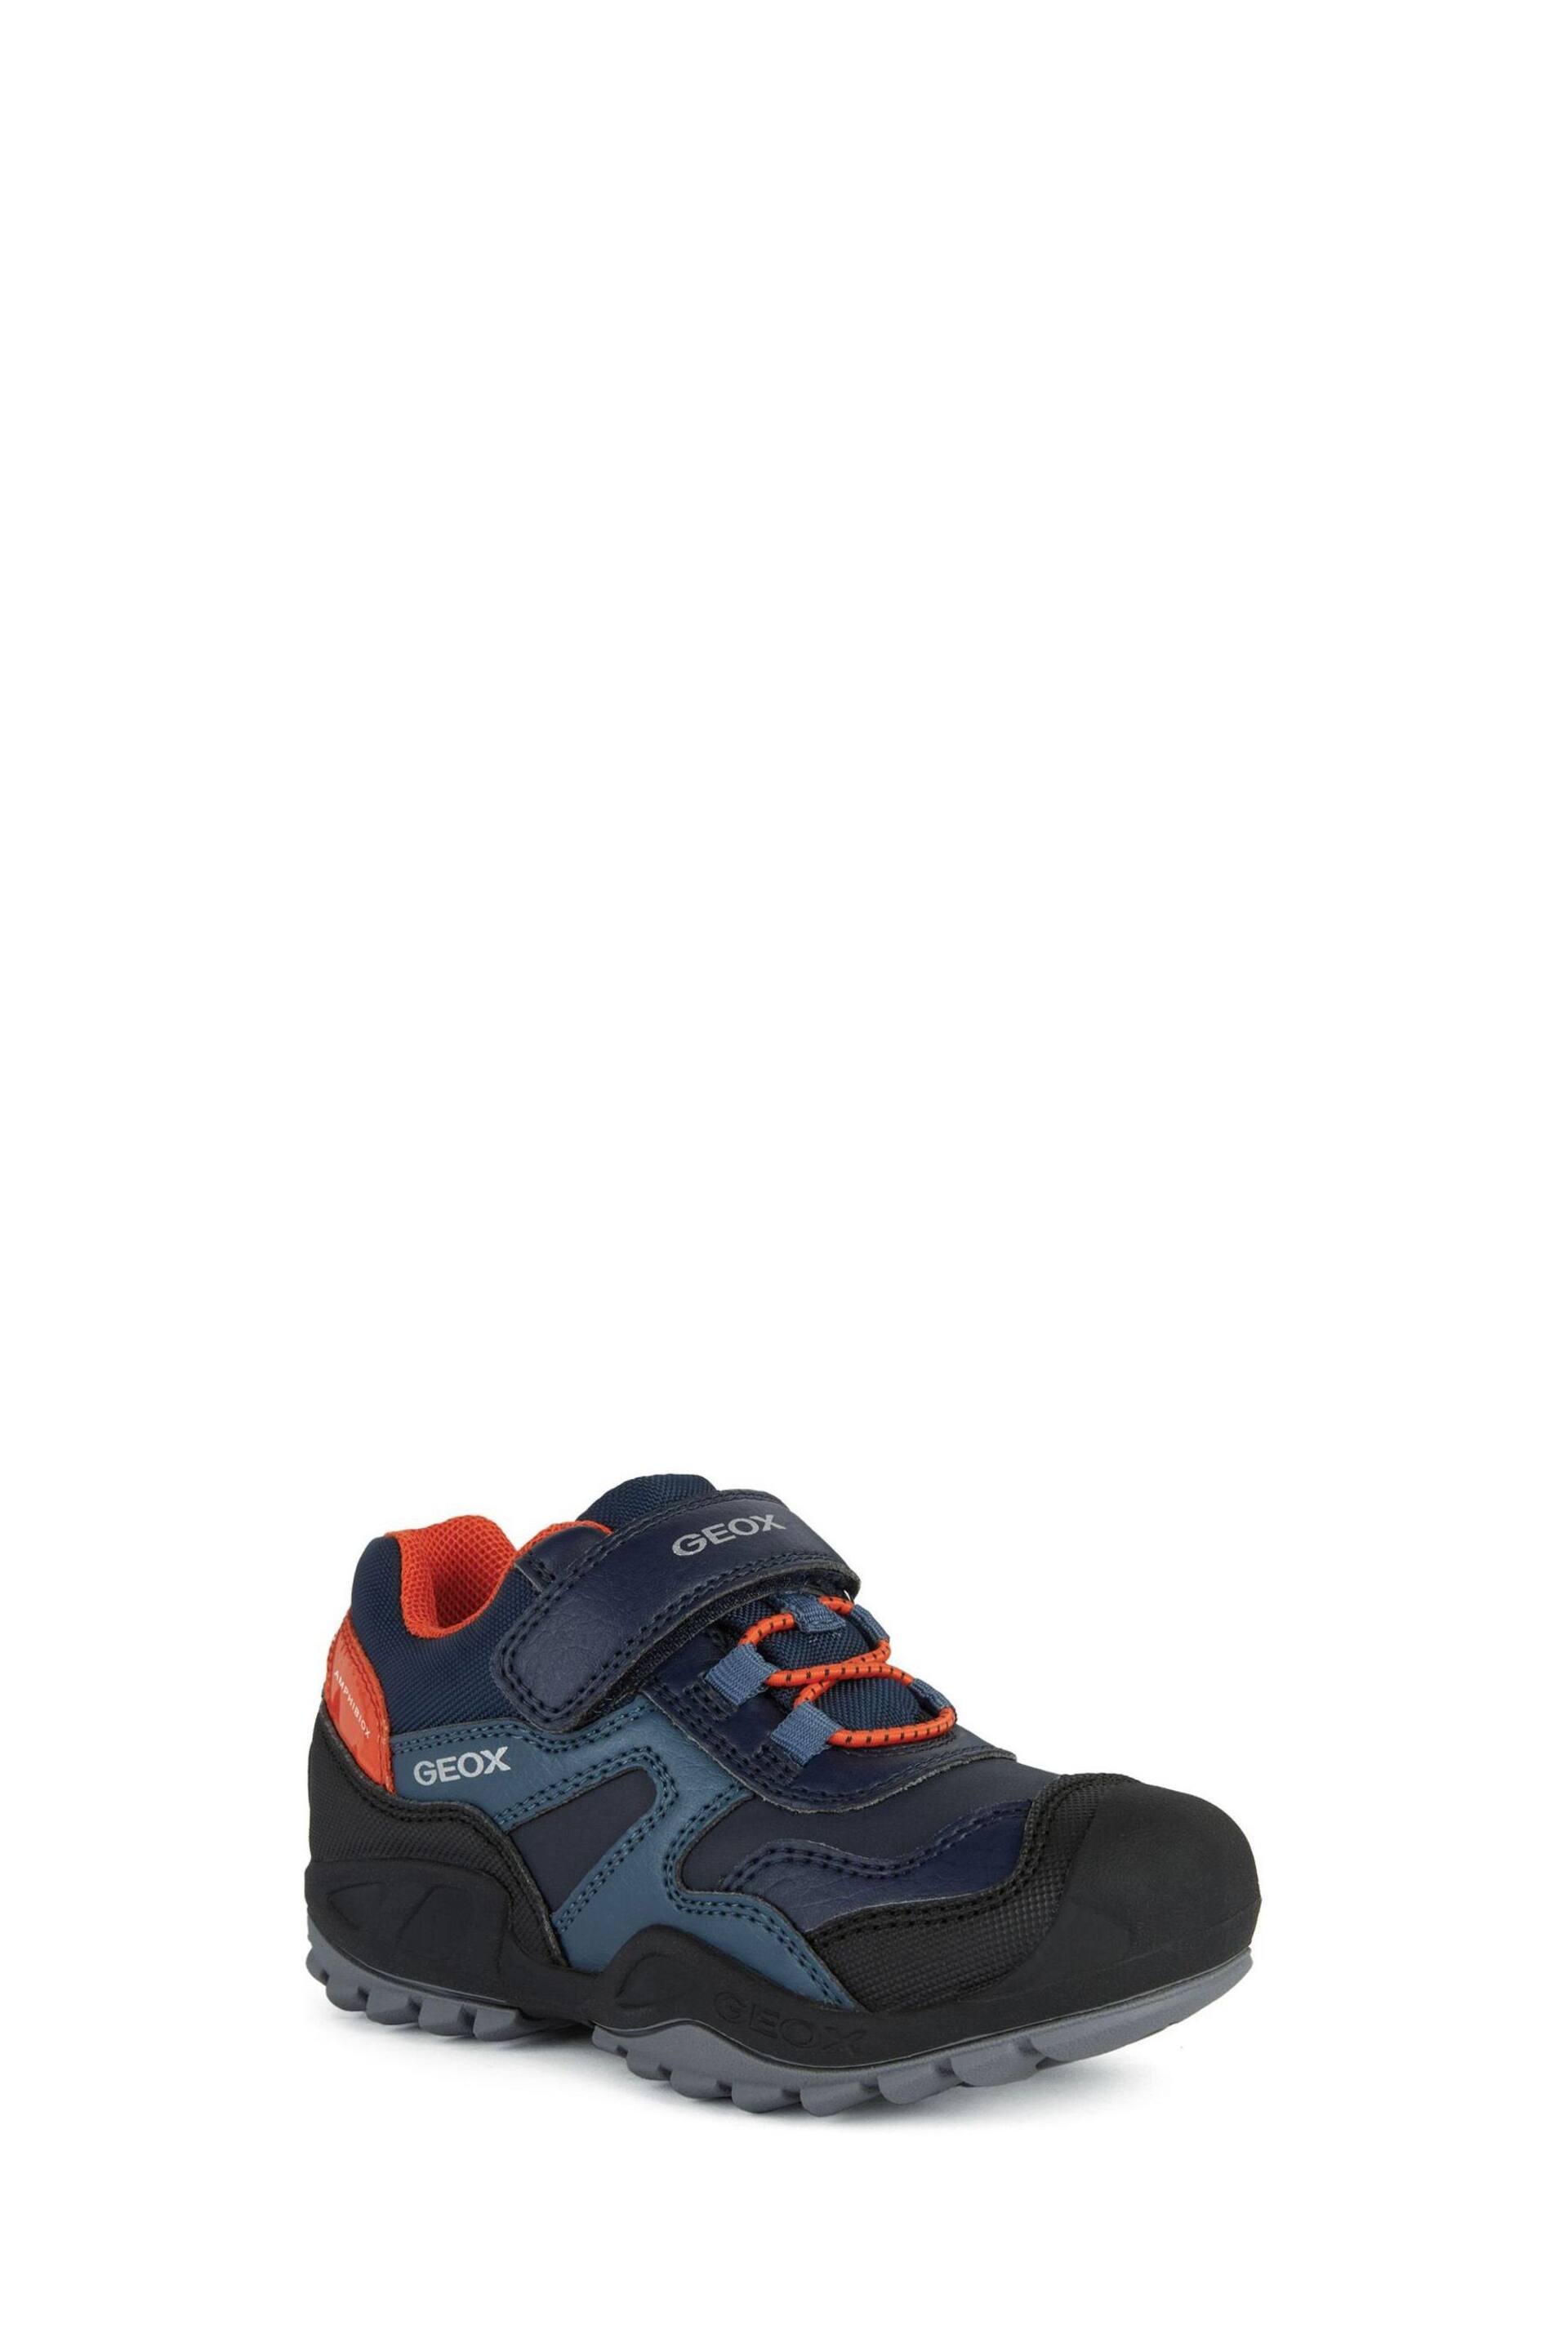 Geox Junior Boys Blue New Savage Shoes - Image 2 of 6